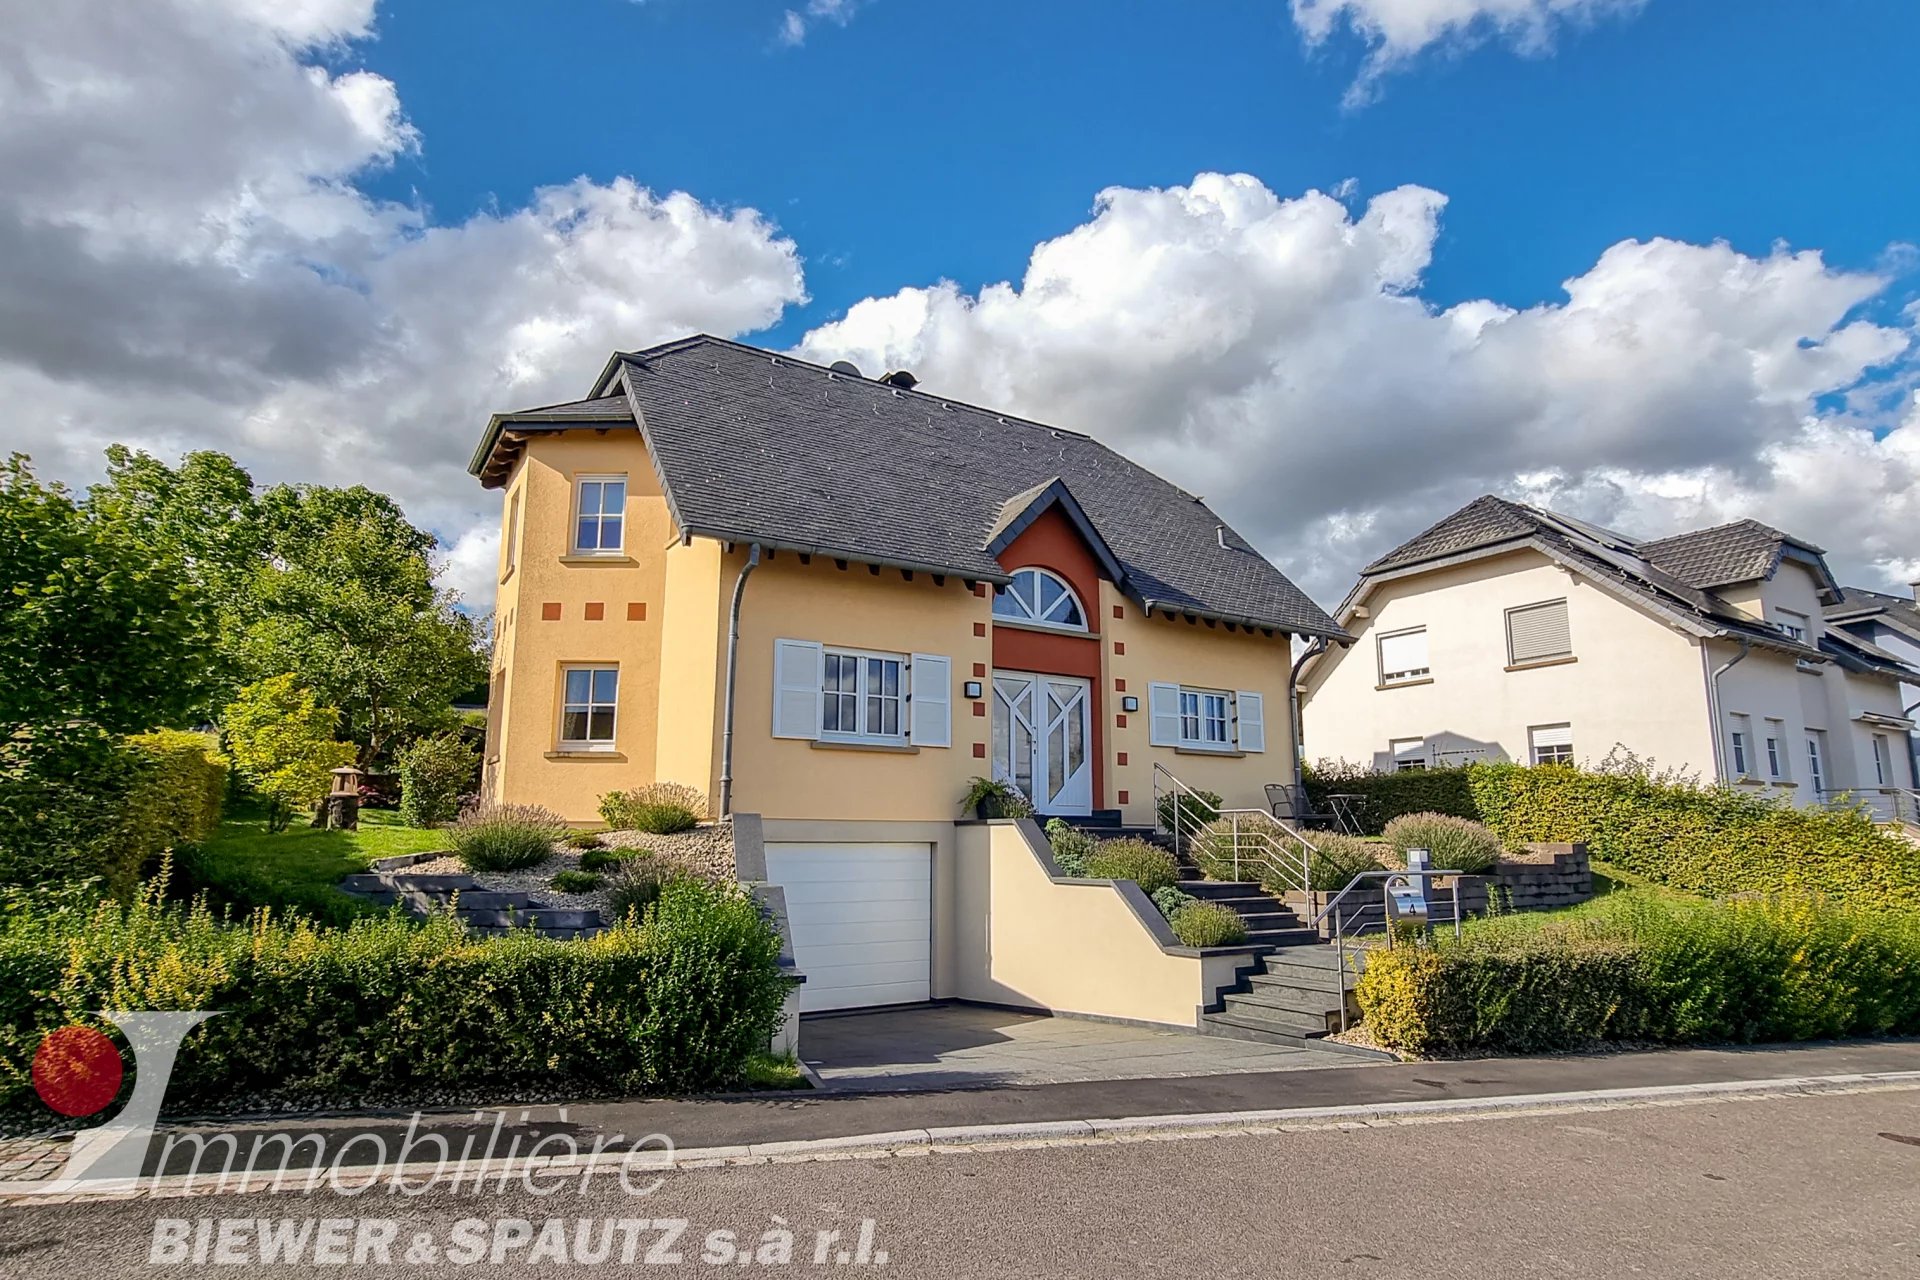 UNDER SALES AGREEMENT - House with 4 bedrooms in Munschecker